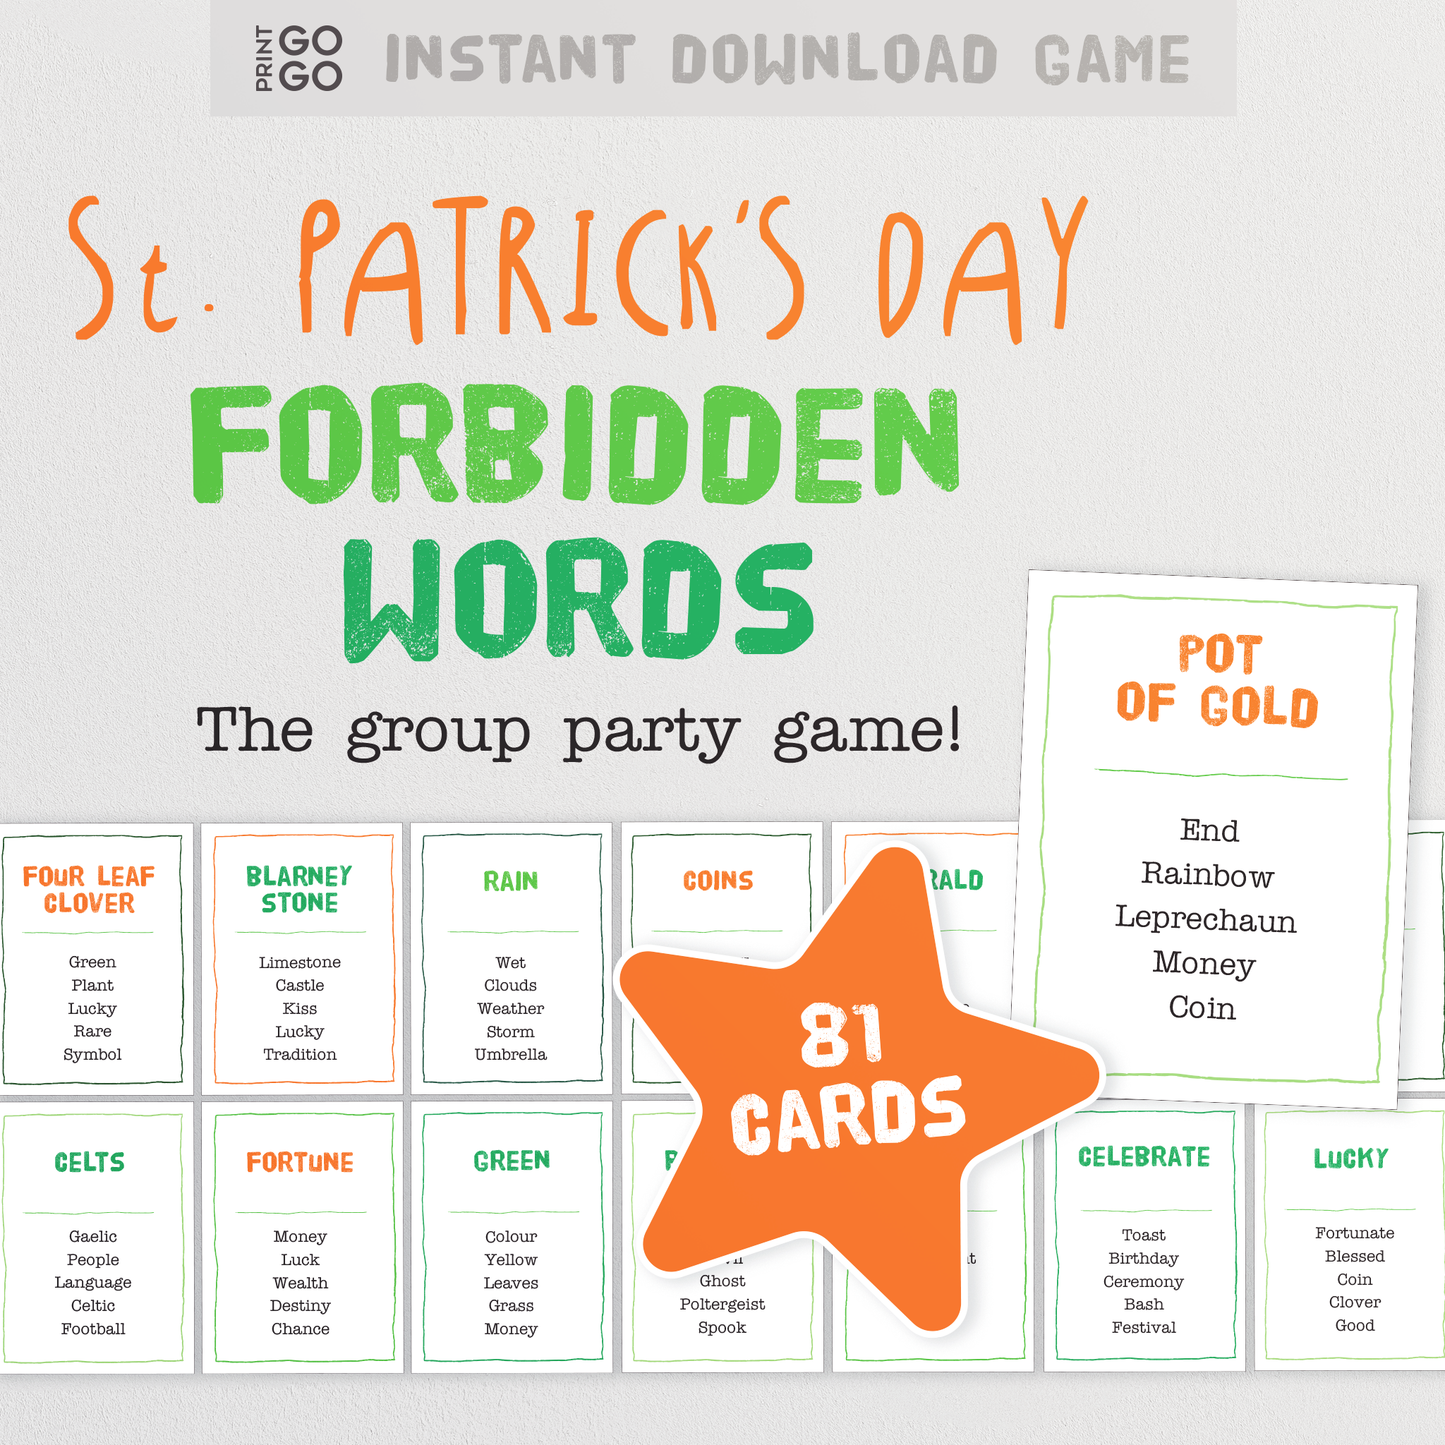 St. Patrick's Day Forbidden Words - The Fun Quick Thinking Family Party Game